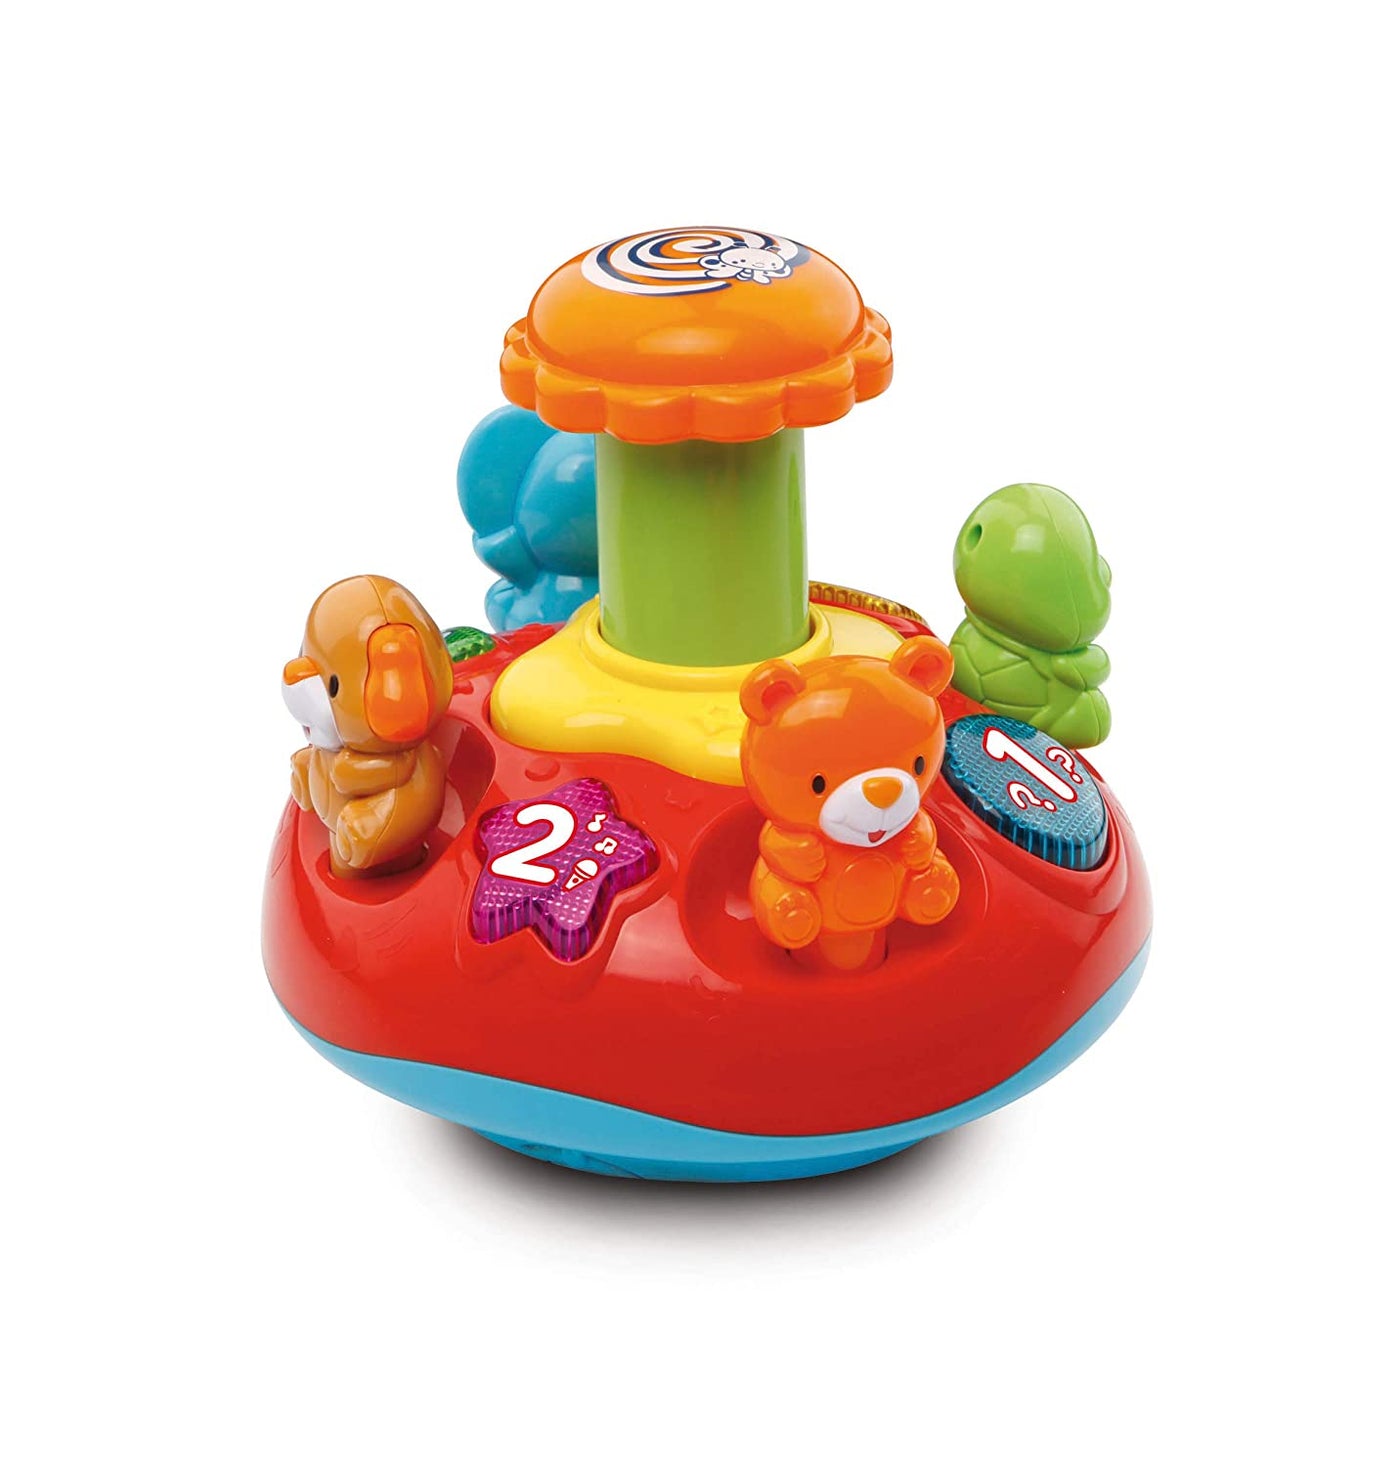 Push & Play Spinning Top